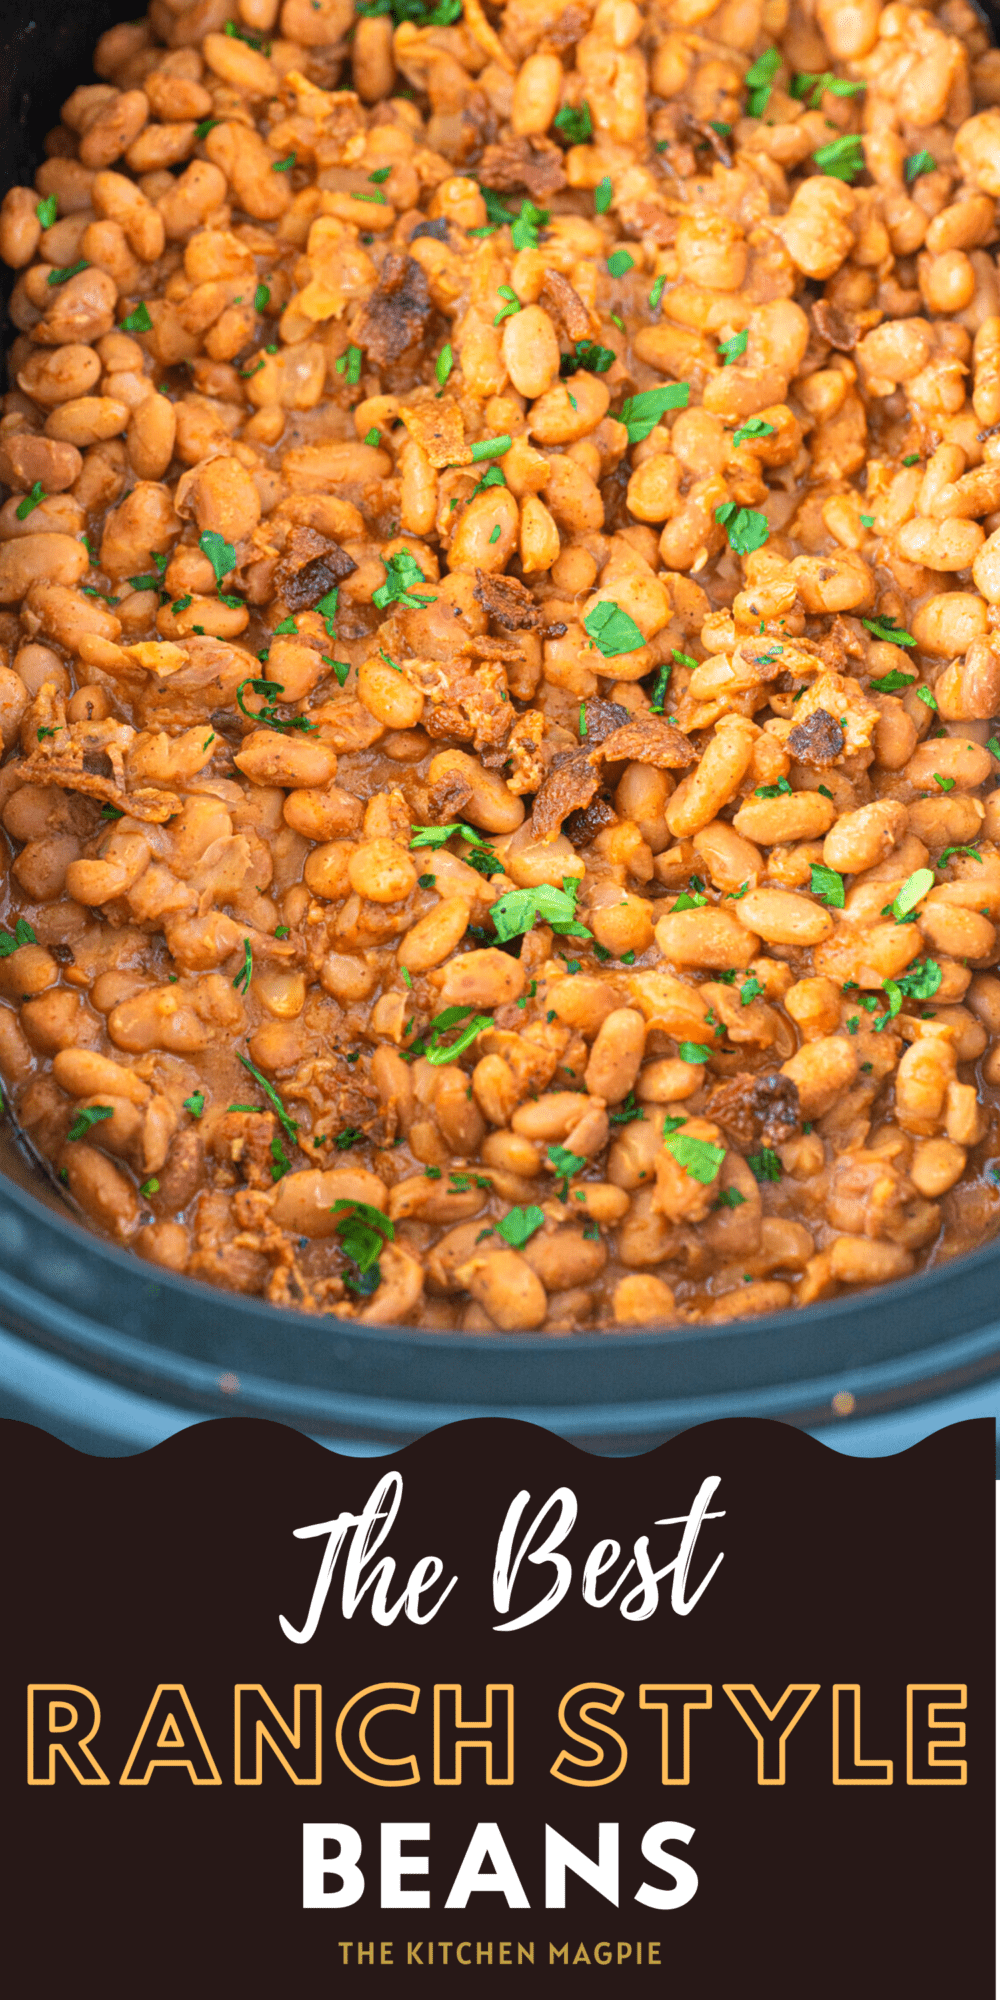 These ranch style beans are made in the slow cooker and are better than the canned ones at the store! The perfect BBQ side dish!